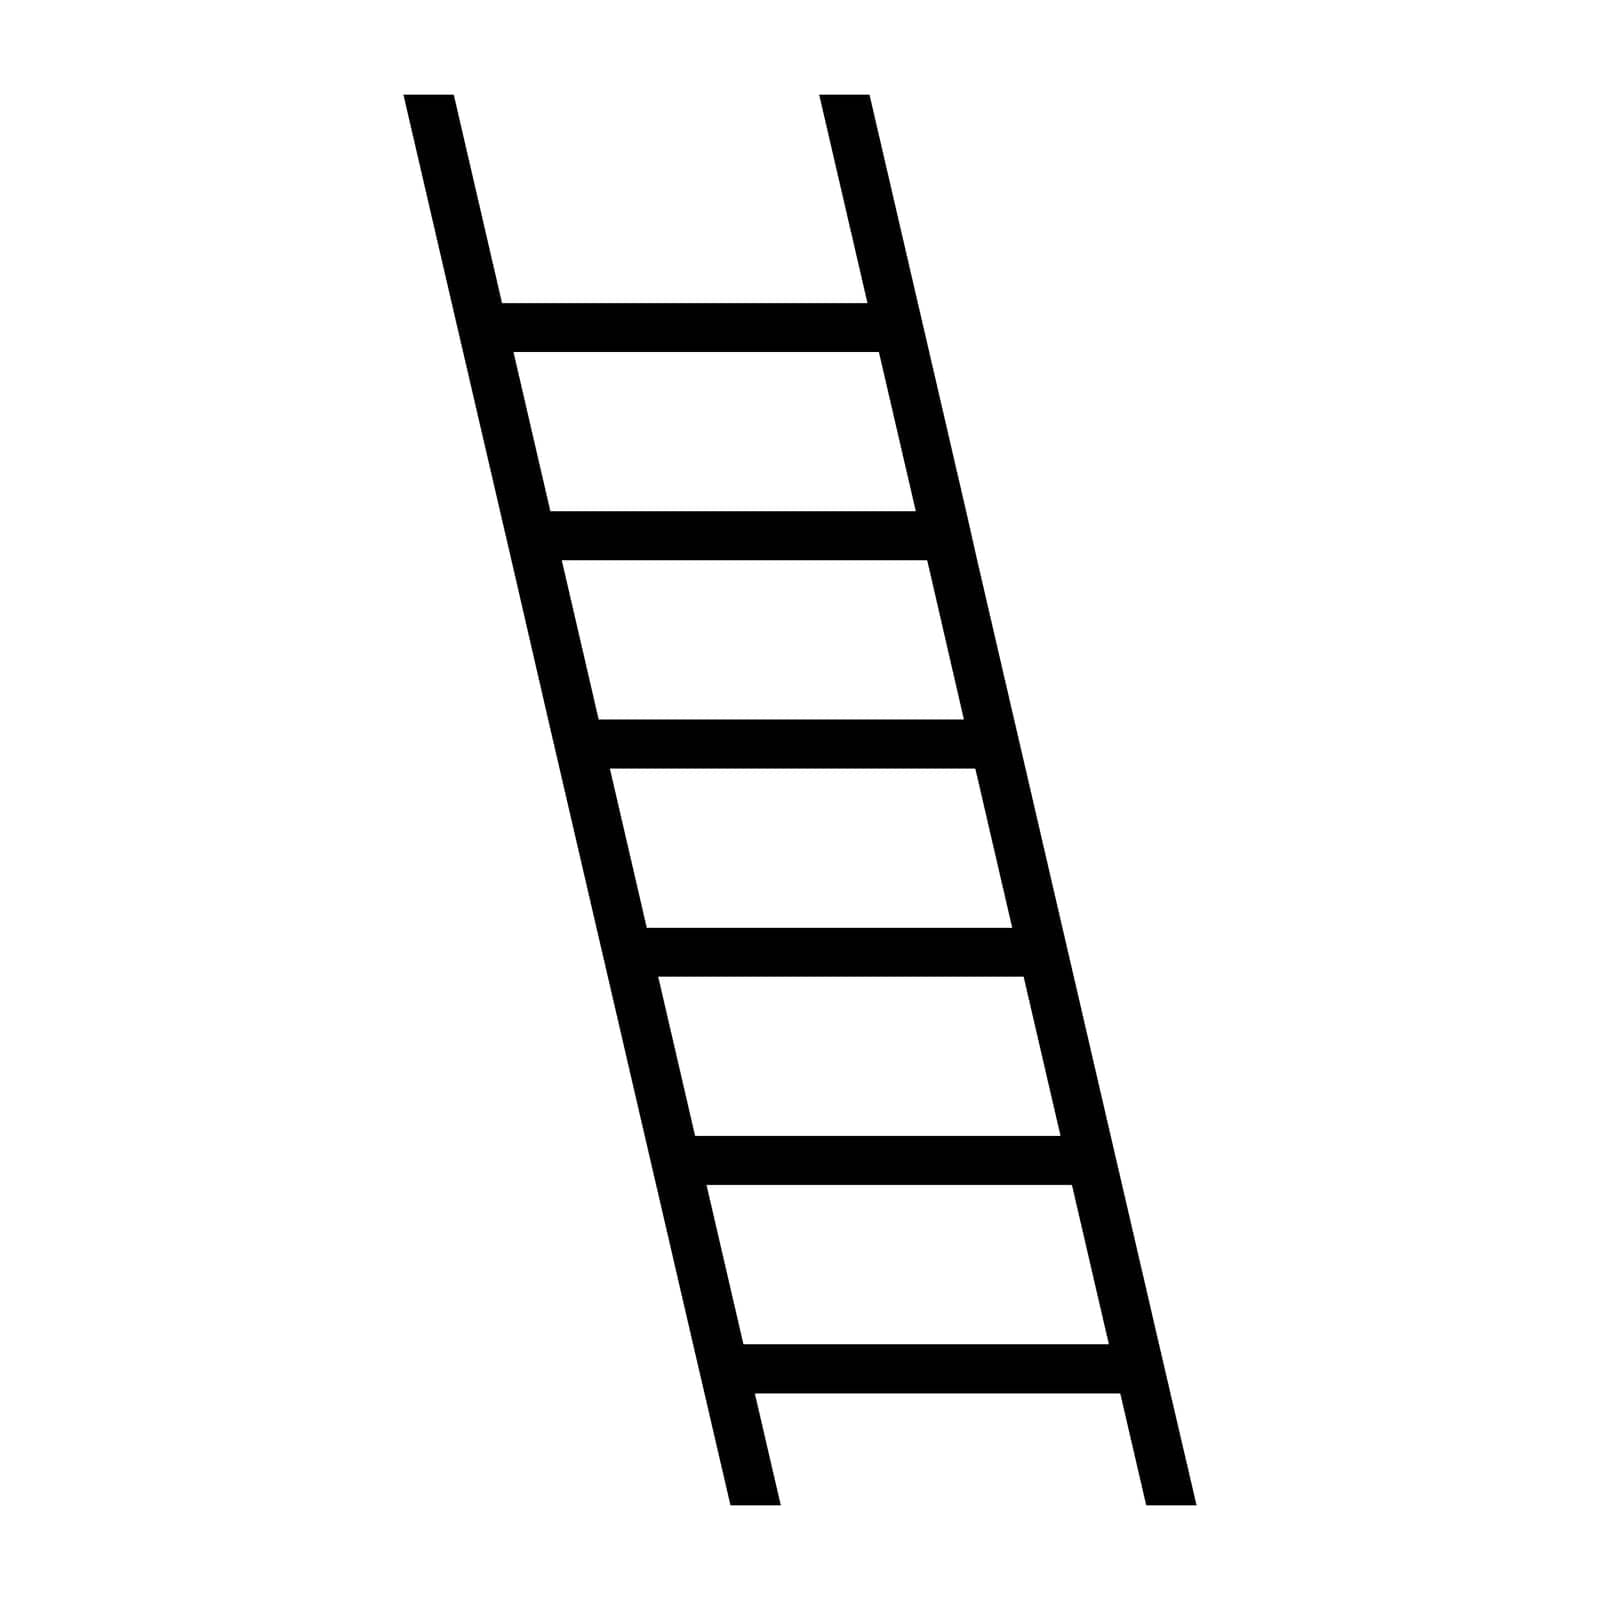 Ladder black vector icon isolated on white background